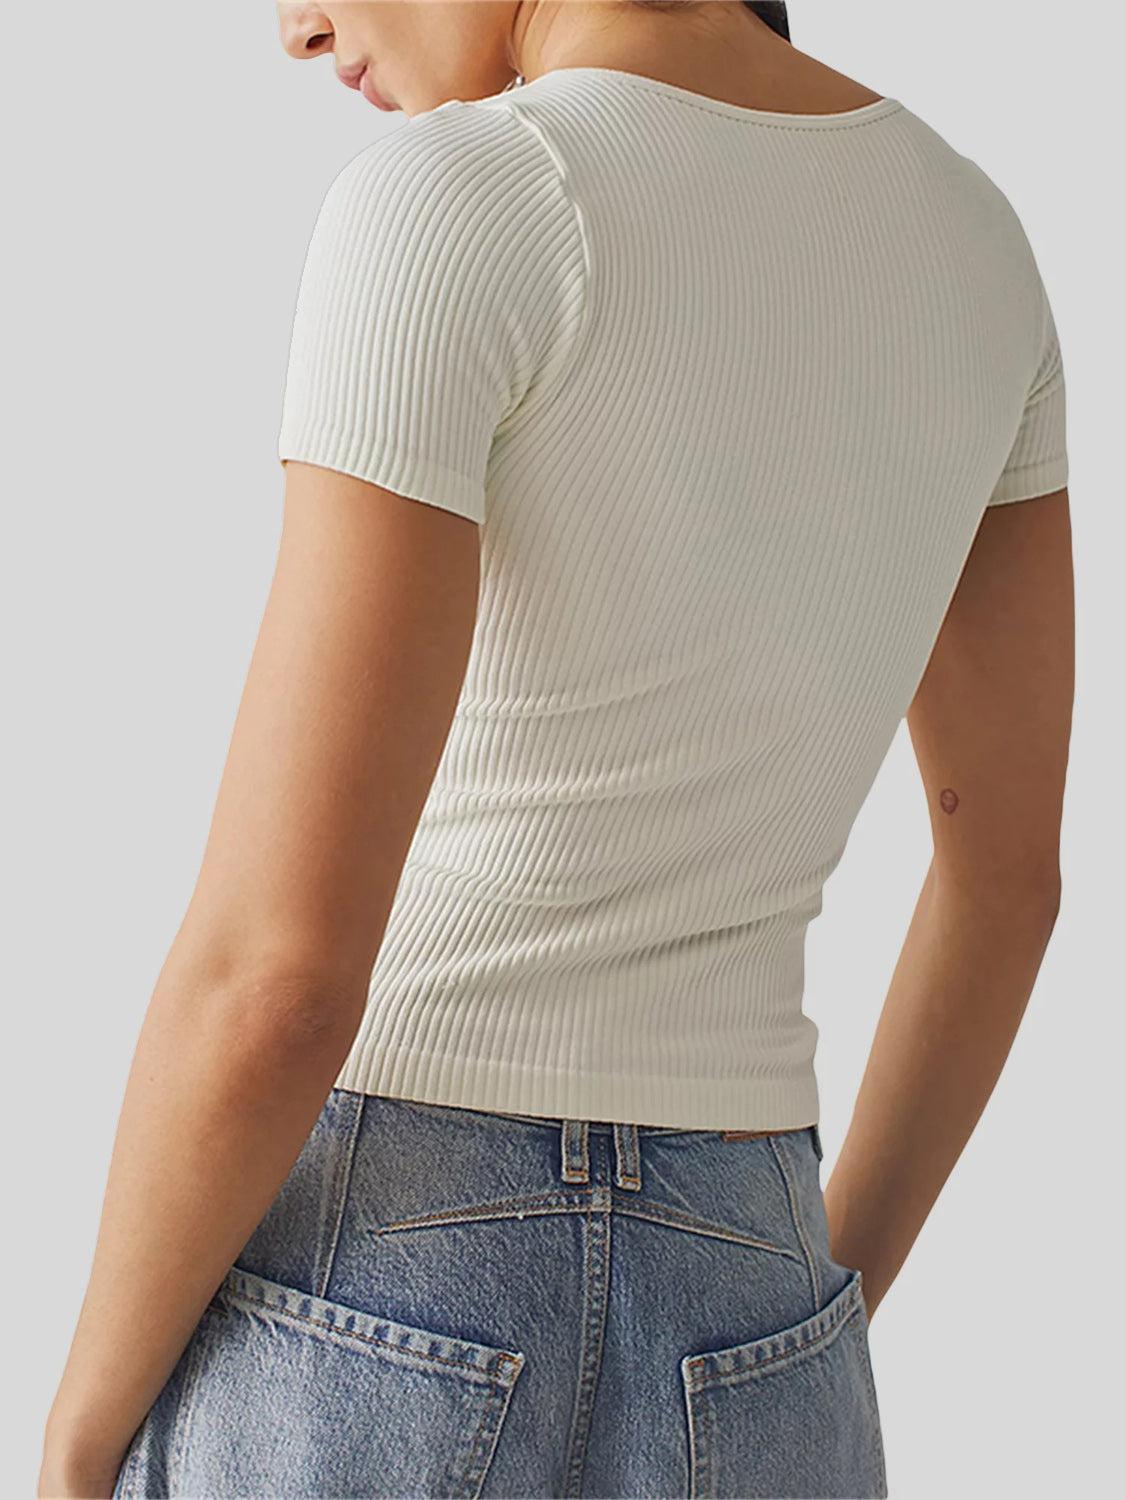 the back of a woman wearing a white top